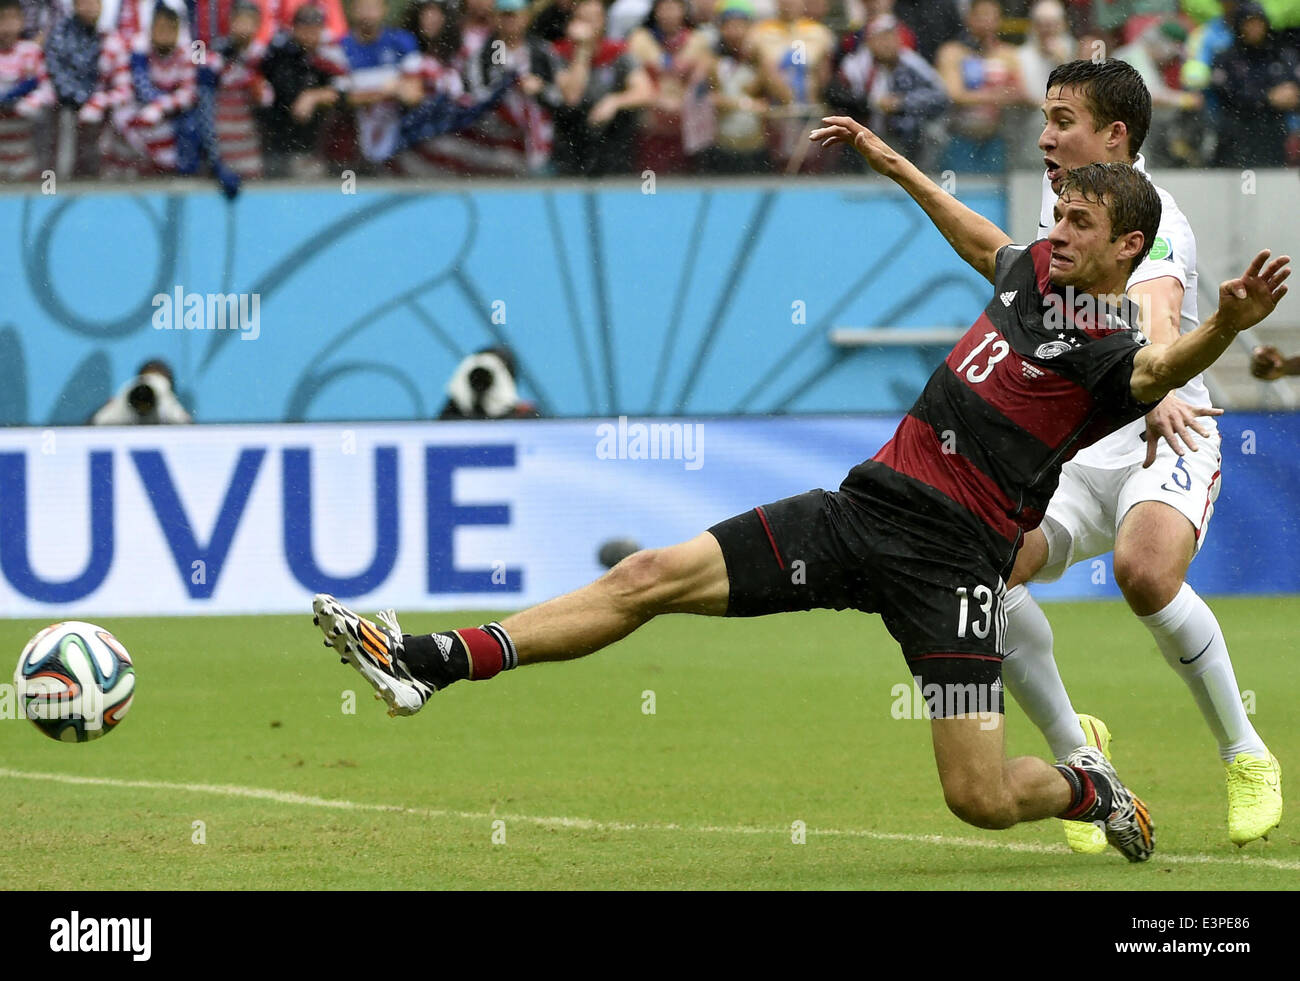 Recife, Brazil. 26th June, 2014. Germany's Thomas Muller (L) vies with Matt Besler of the U.S. during a Group G match between the U.S. and Germany of 2014 FIFA World Cup at the Arena Pernambuco Stadium in Recife, Brazil, on June 26, 2014. Credit:  Lui Siu Wai/Xinhua/Alamy Live News Stock Photo